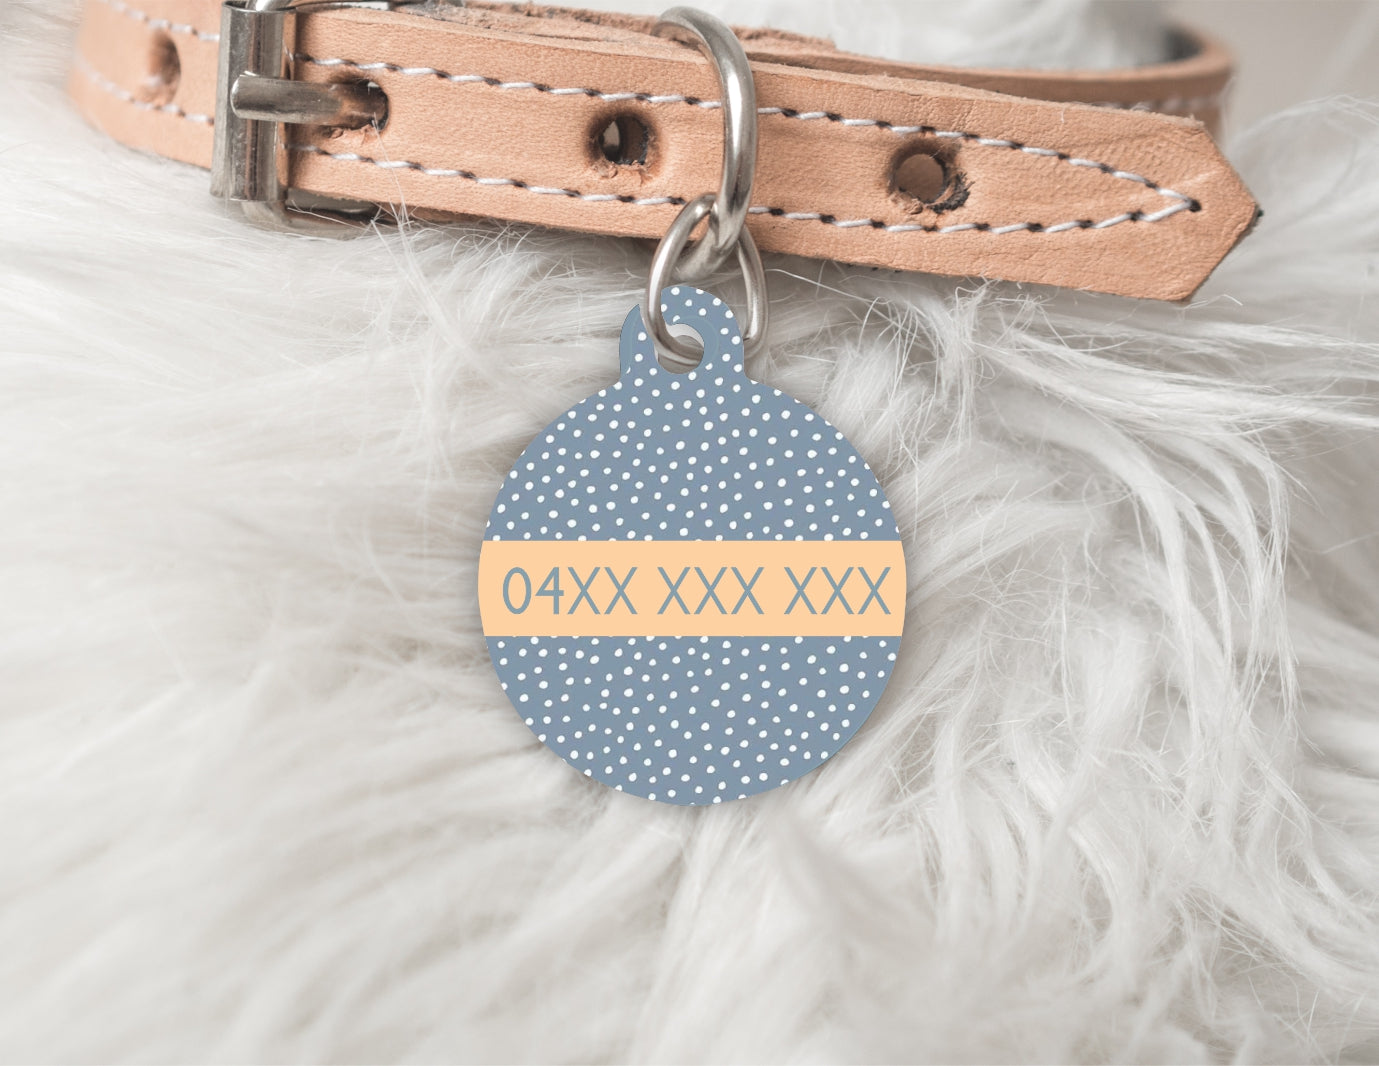 Pet dog or cat ID Tag -  The Harper